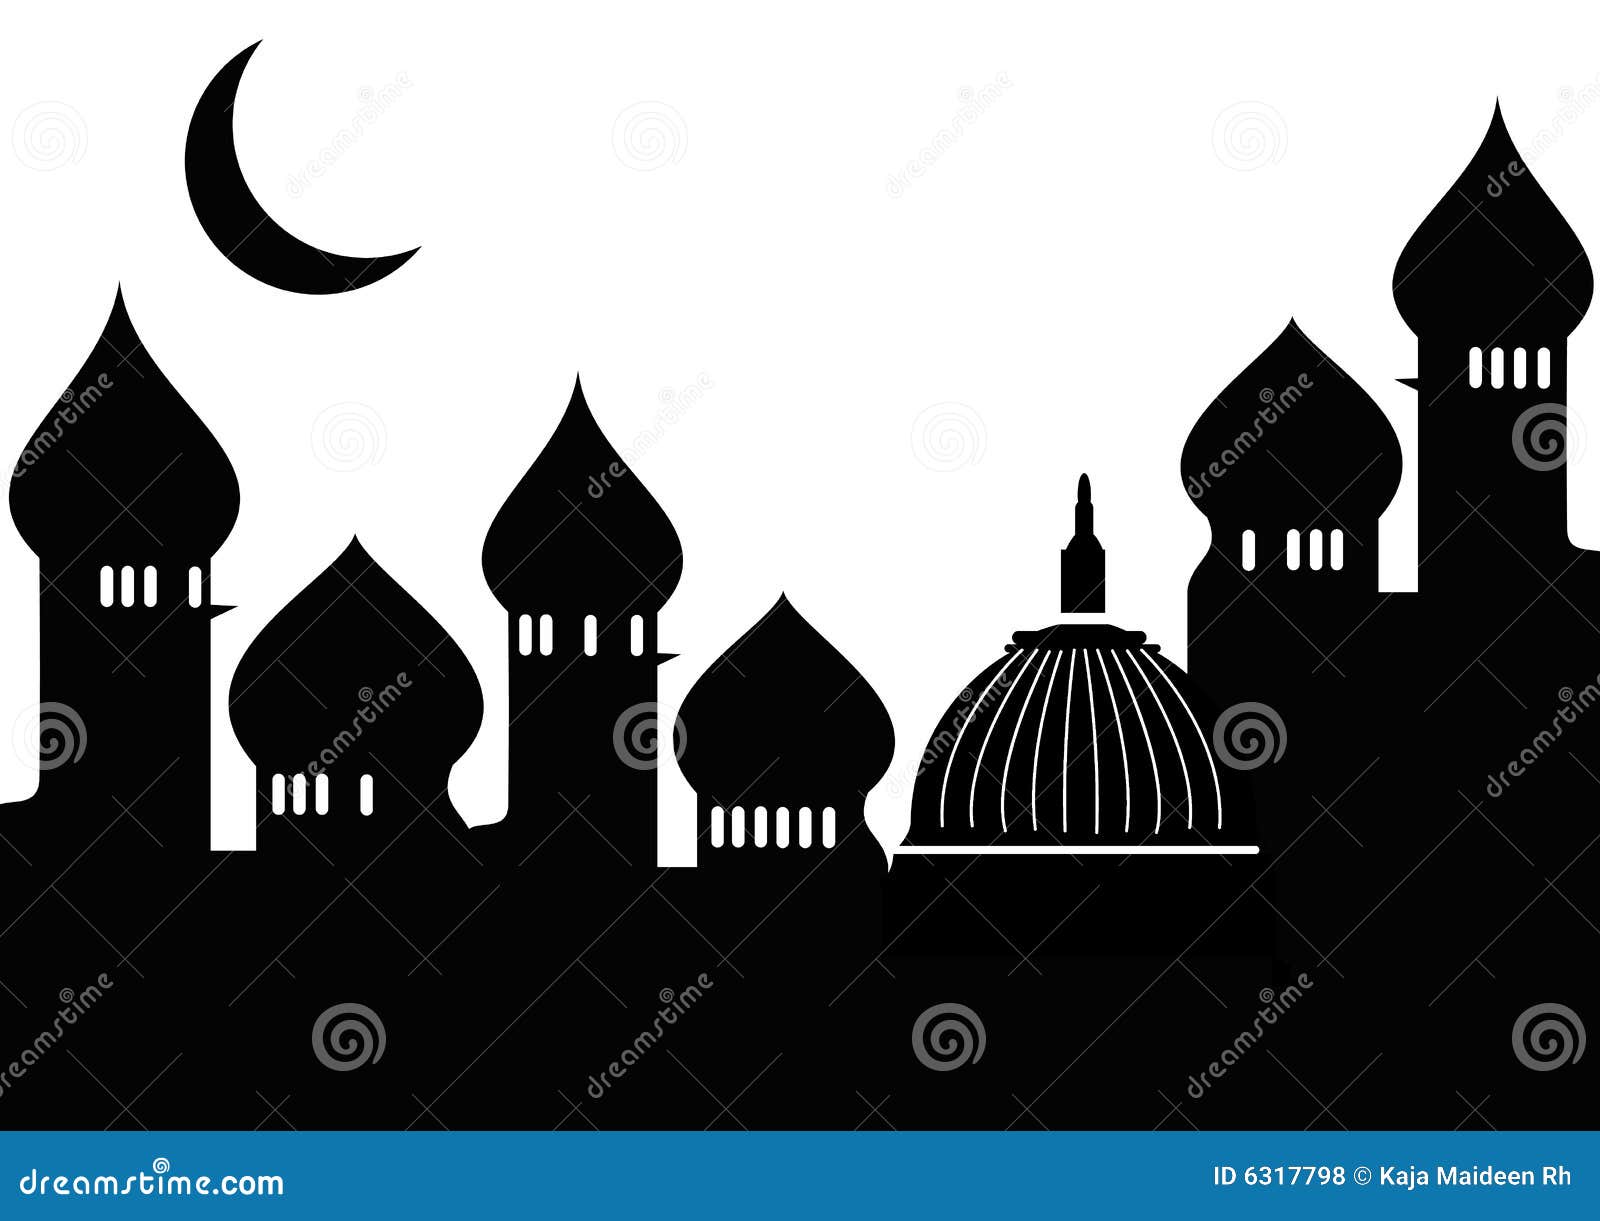 Mosque With Moon Royalty Free Stock Photos - Image: 6317798